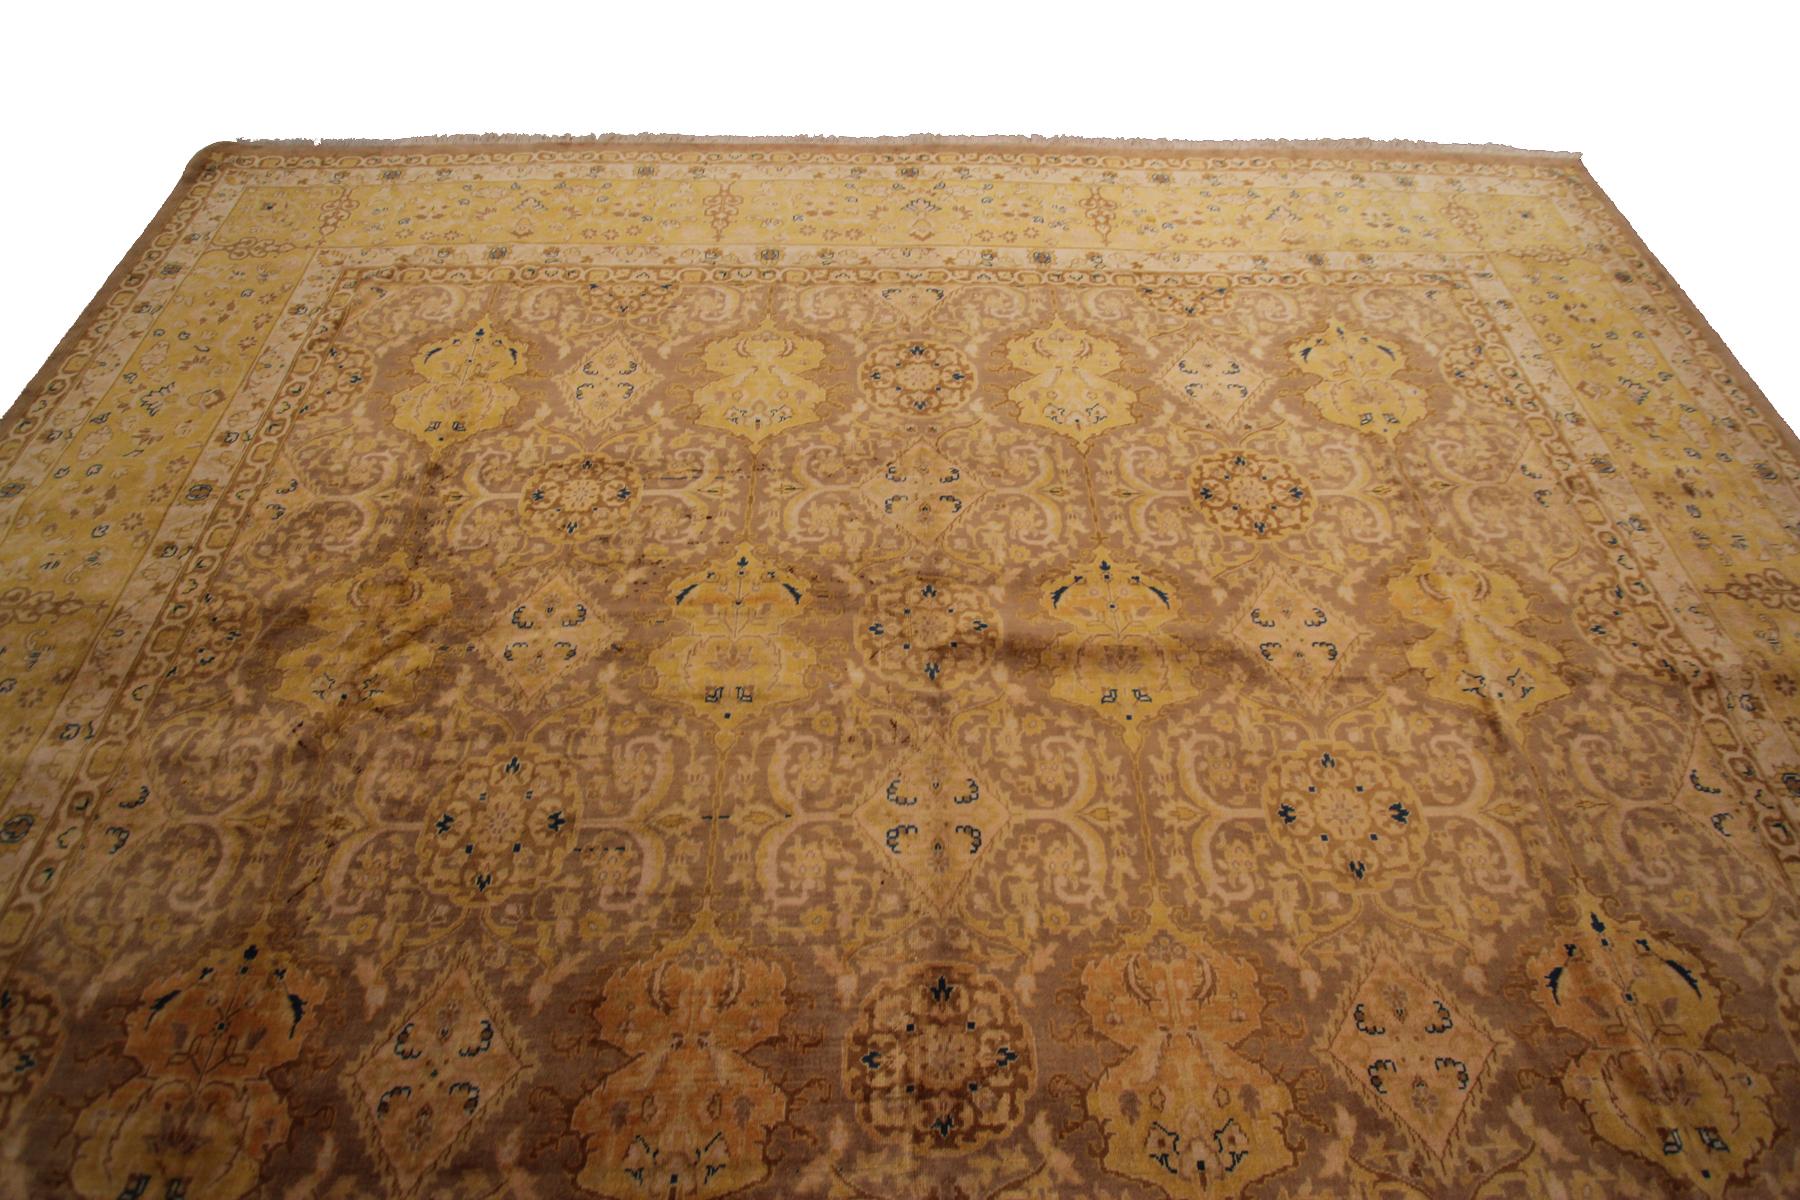 Hand-Knotted Vintage Tabriz Rug Geometric Overall Design Gold 9x12 Handmade Persian Rug For Sale